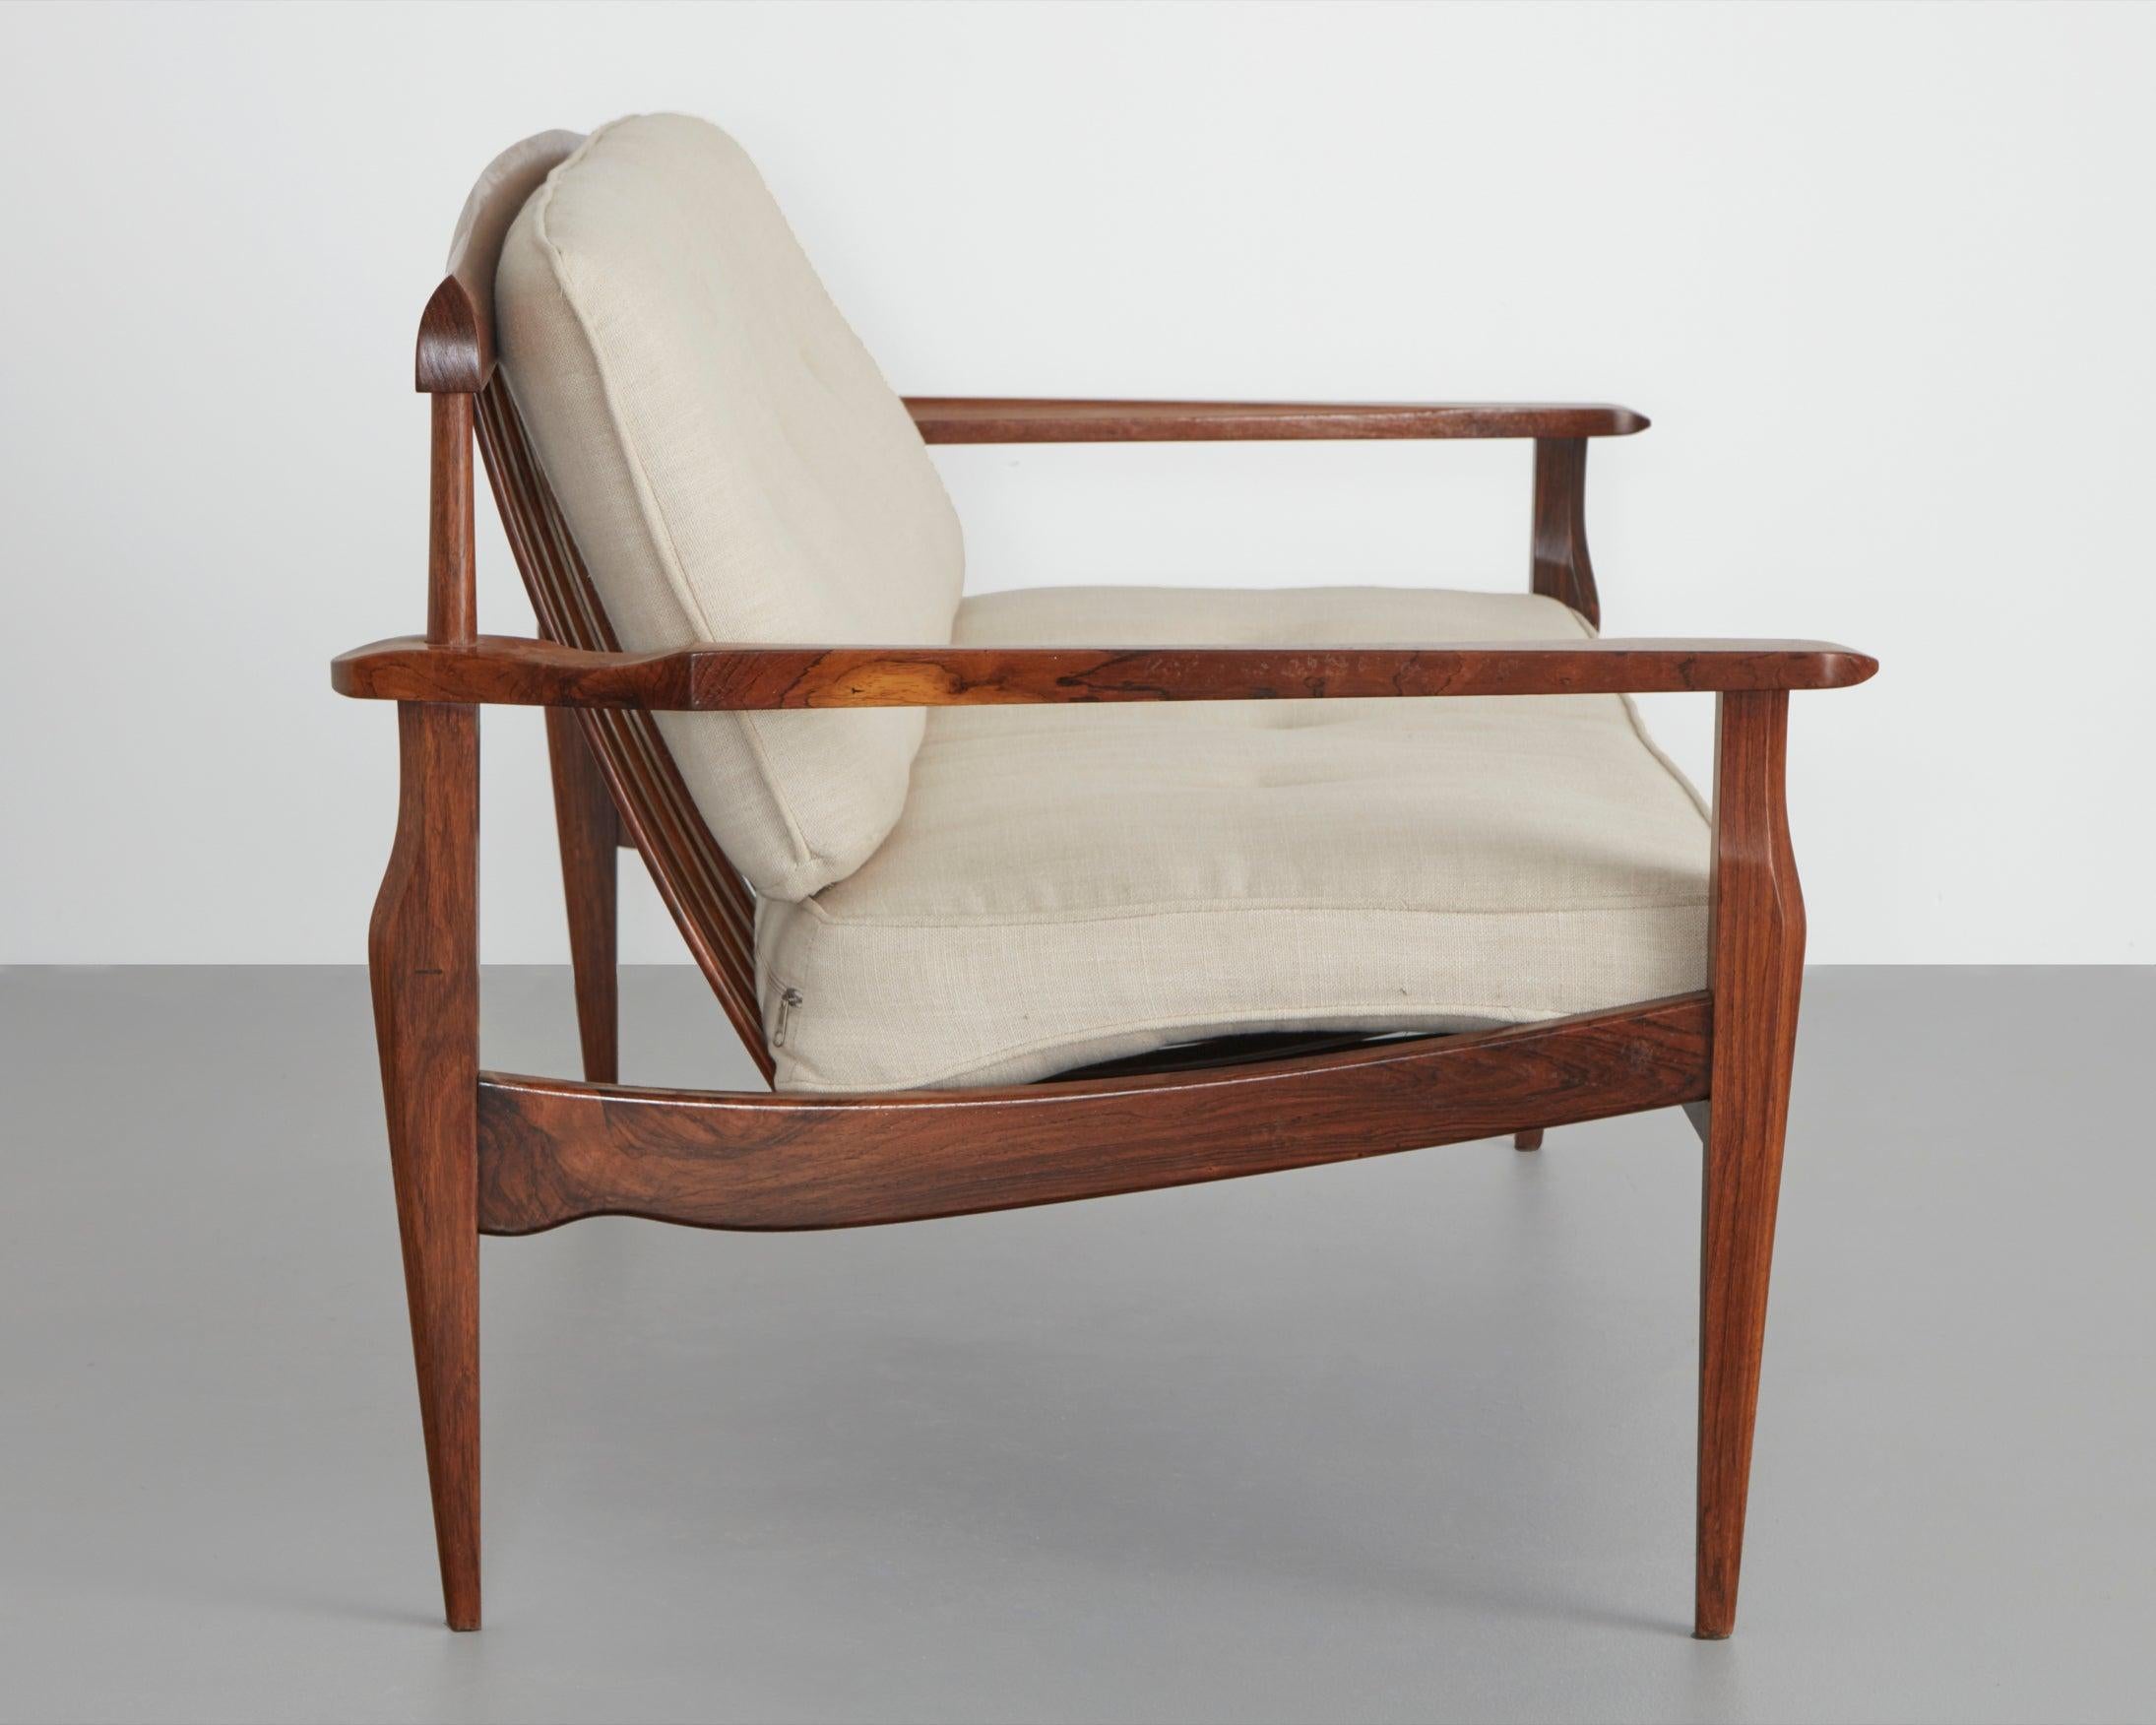 Two-seat sofa with rosewood frame and upholstered cushions. Designed by Joaquim
Tenreiro, Brazil, circa 1960s.